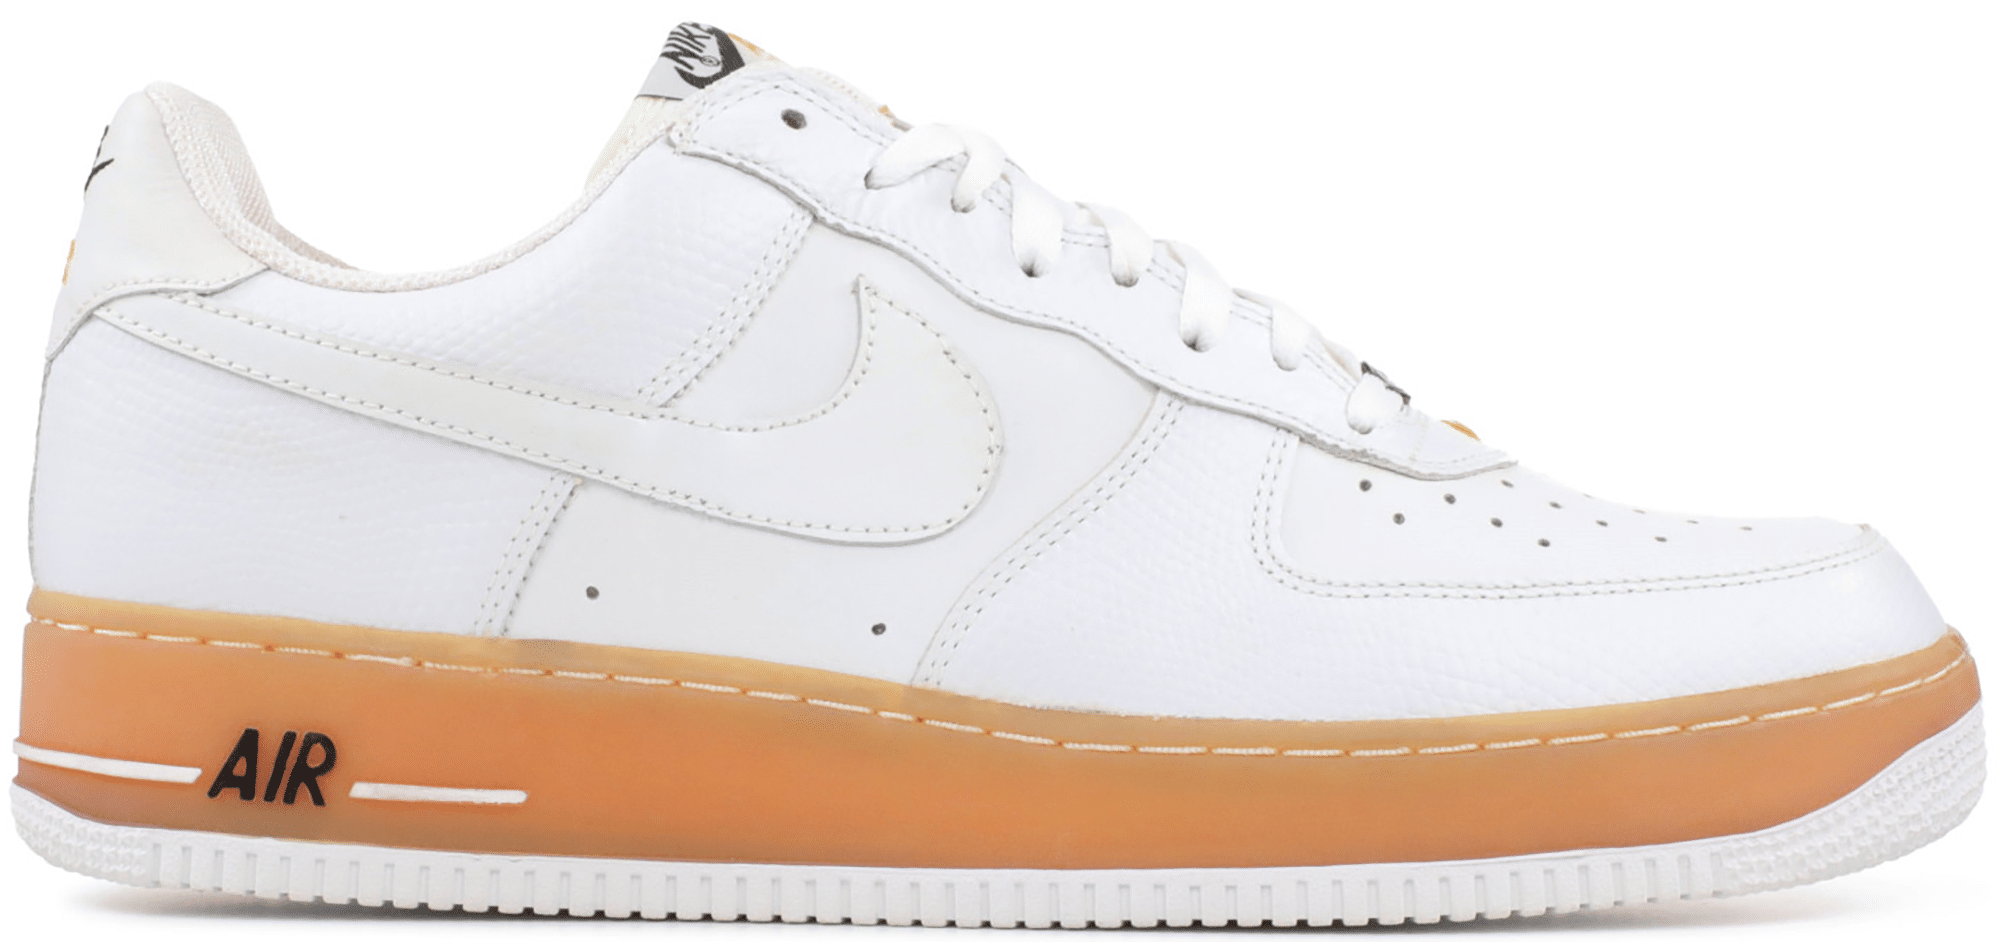 Nike Air Force Low JD Sports White Gum Midsole